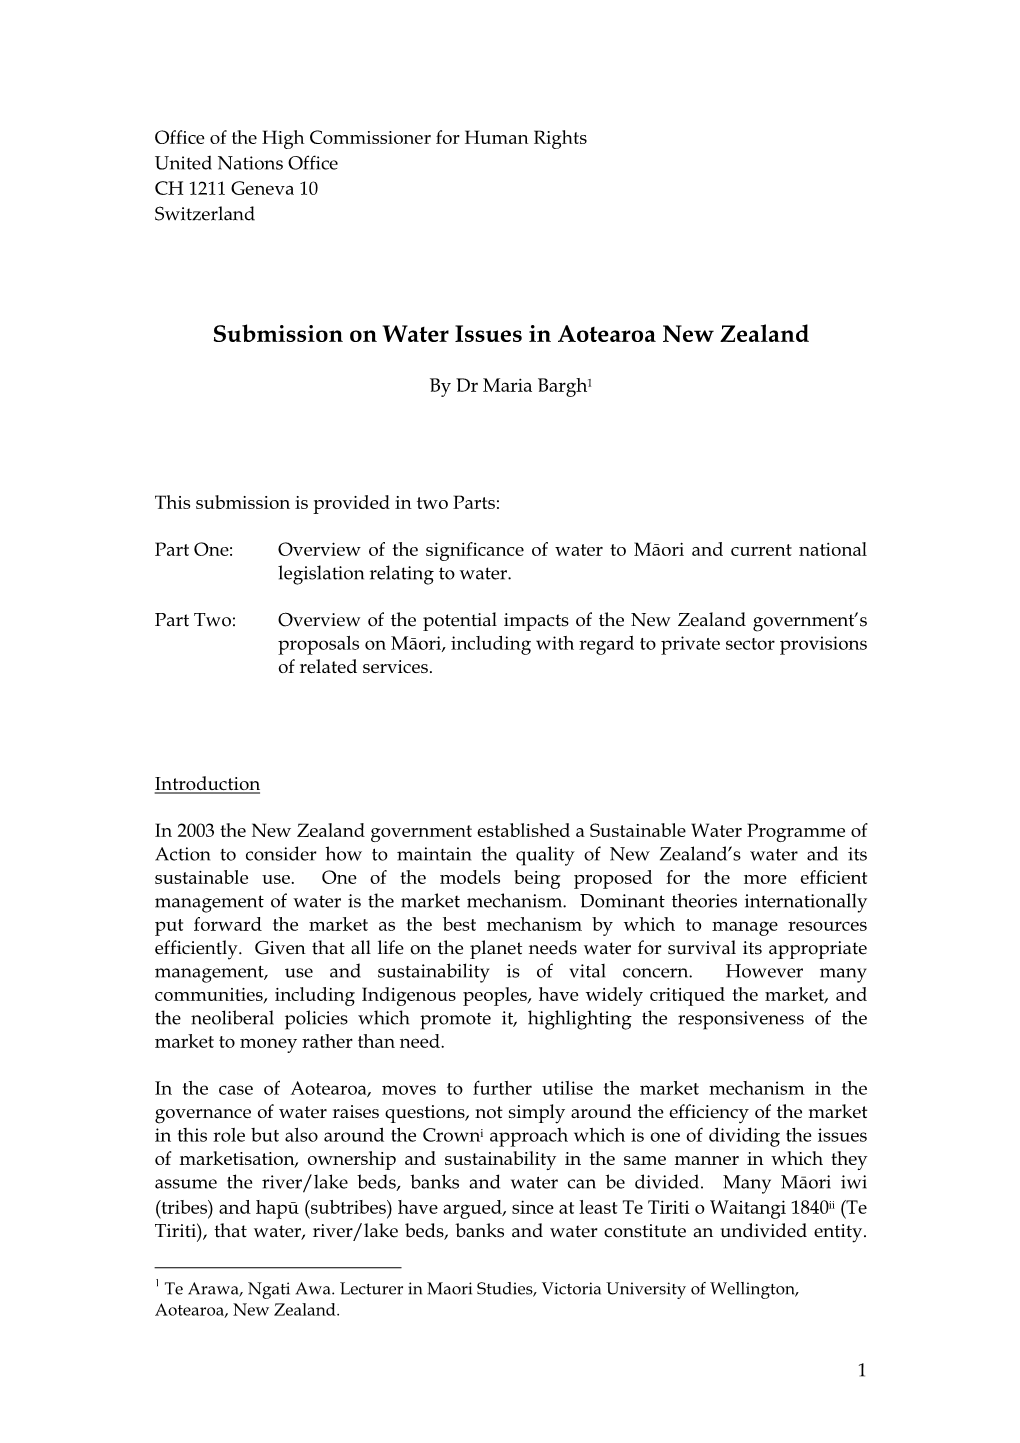 Submission on Water Issues in Aotearoa New Zealand